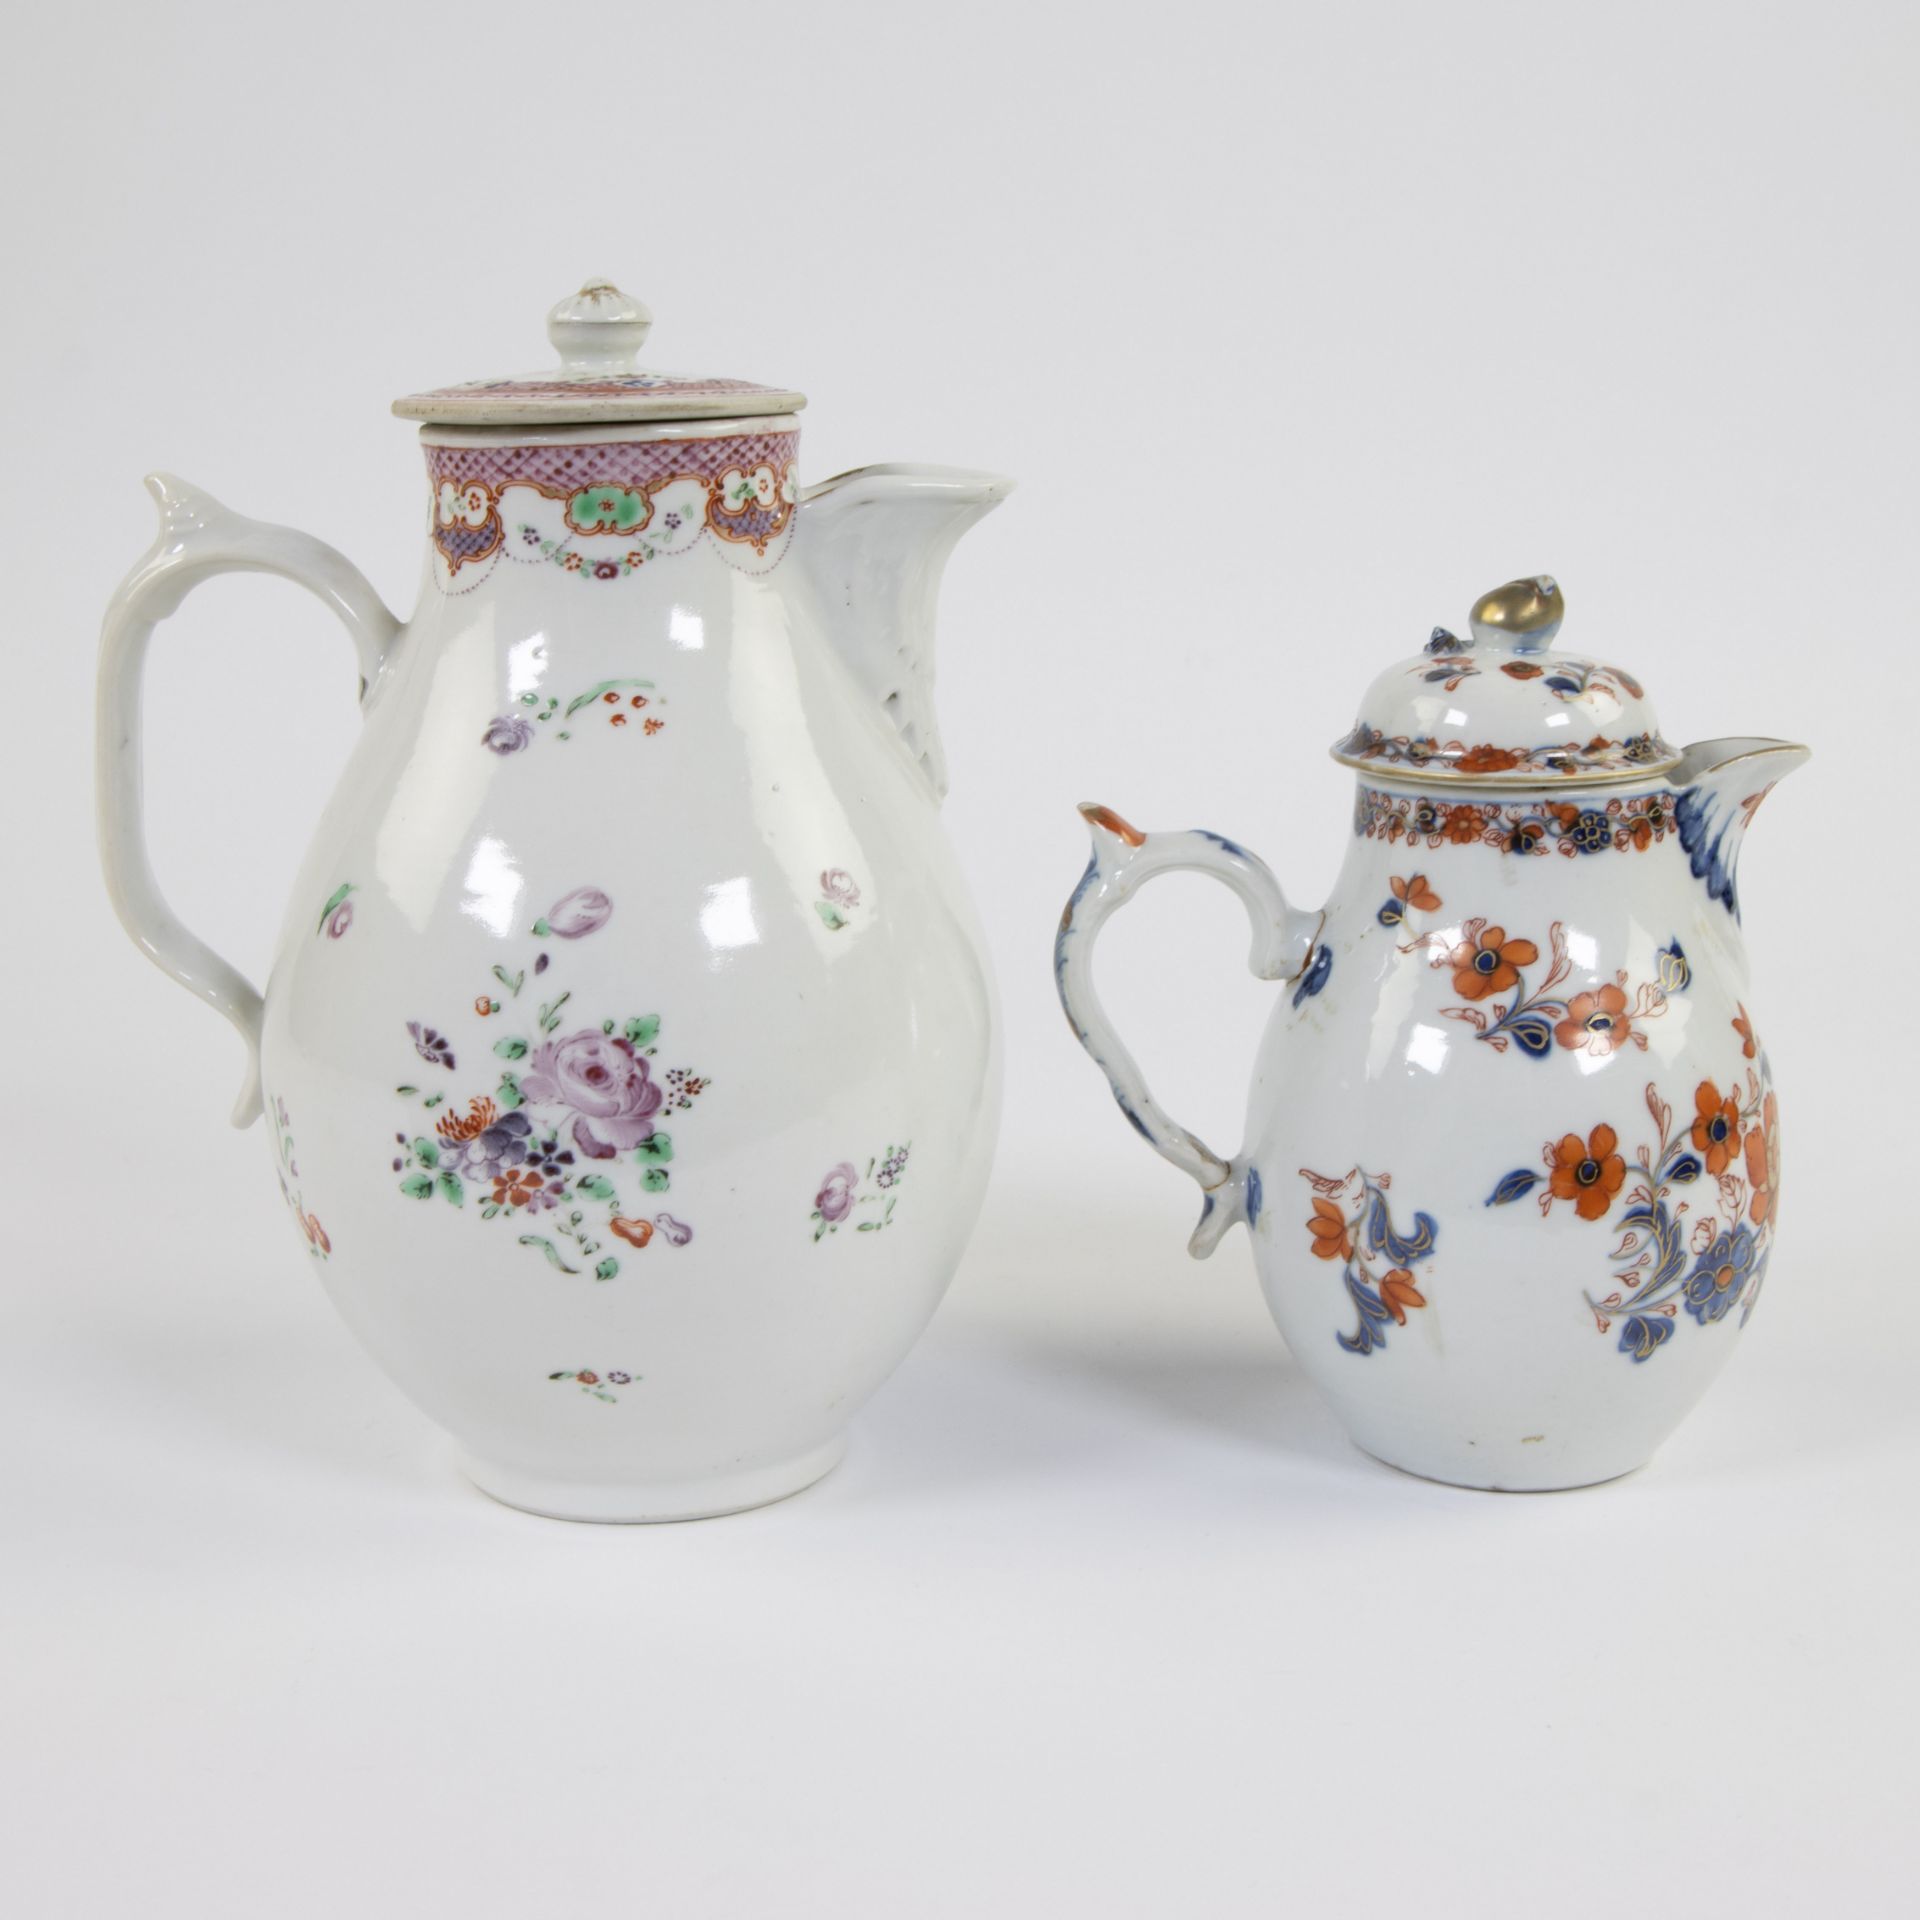 Collection of 2 Chinese teapots famille rose and Imari, 18th century - Image 3 of 8